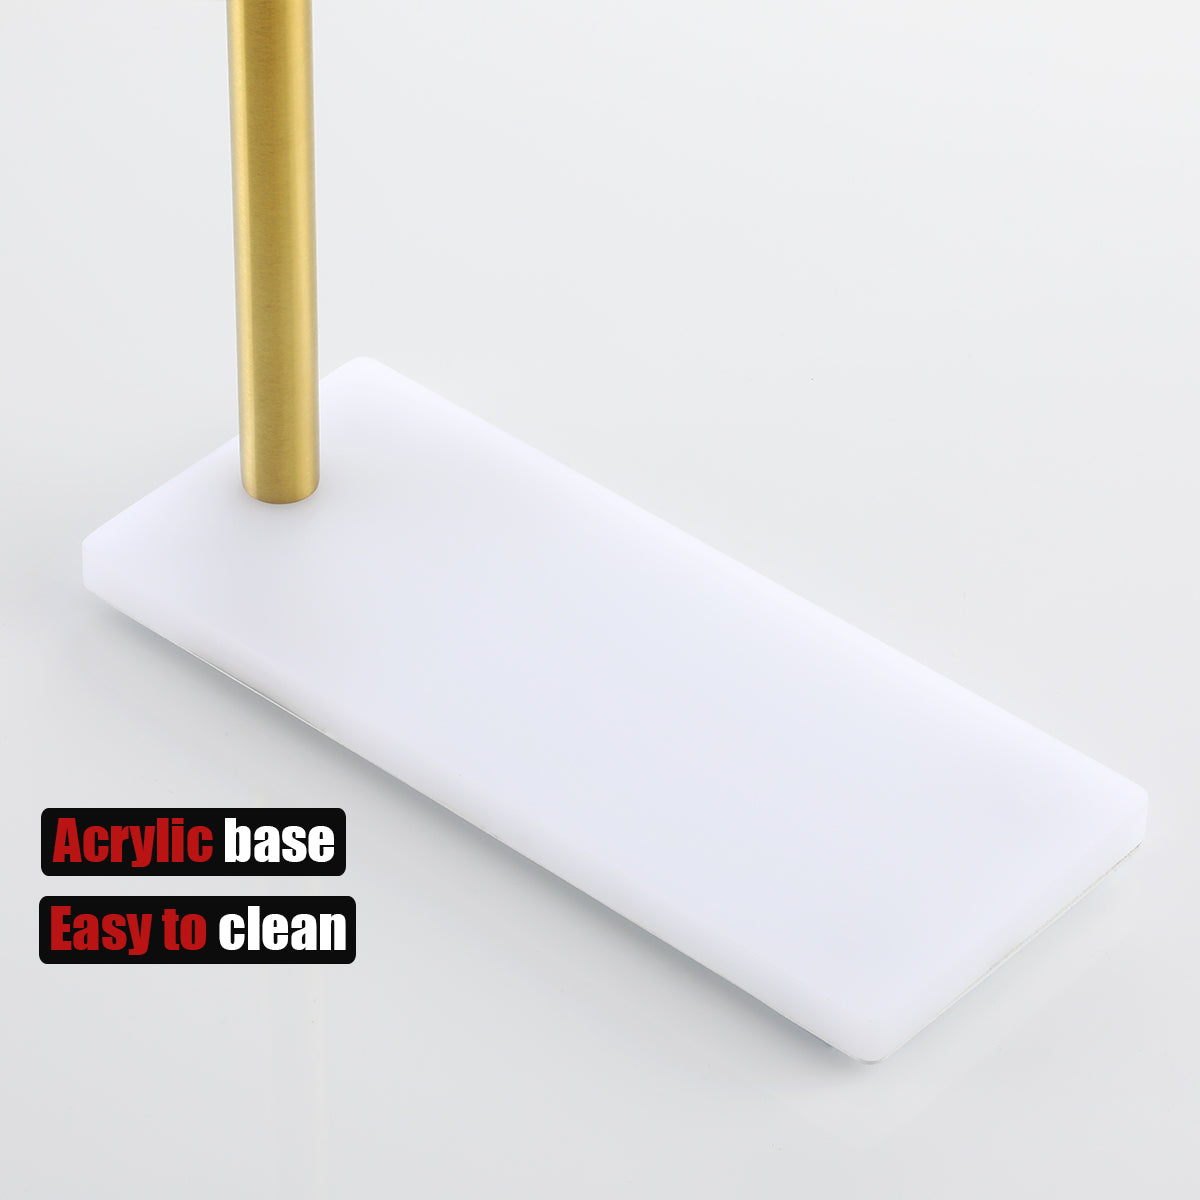 Brushed Gold Brass Paper Towel Holder Stand for Kitchen Countertop